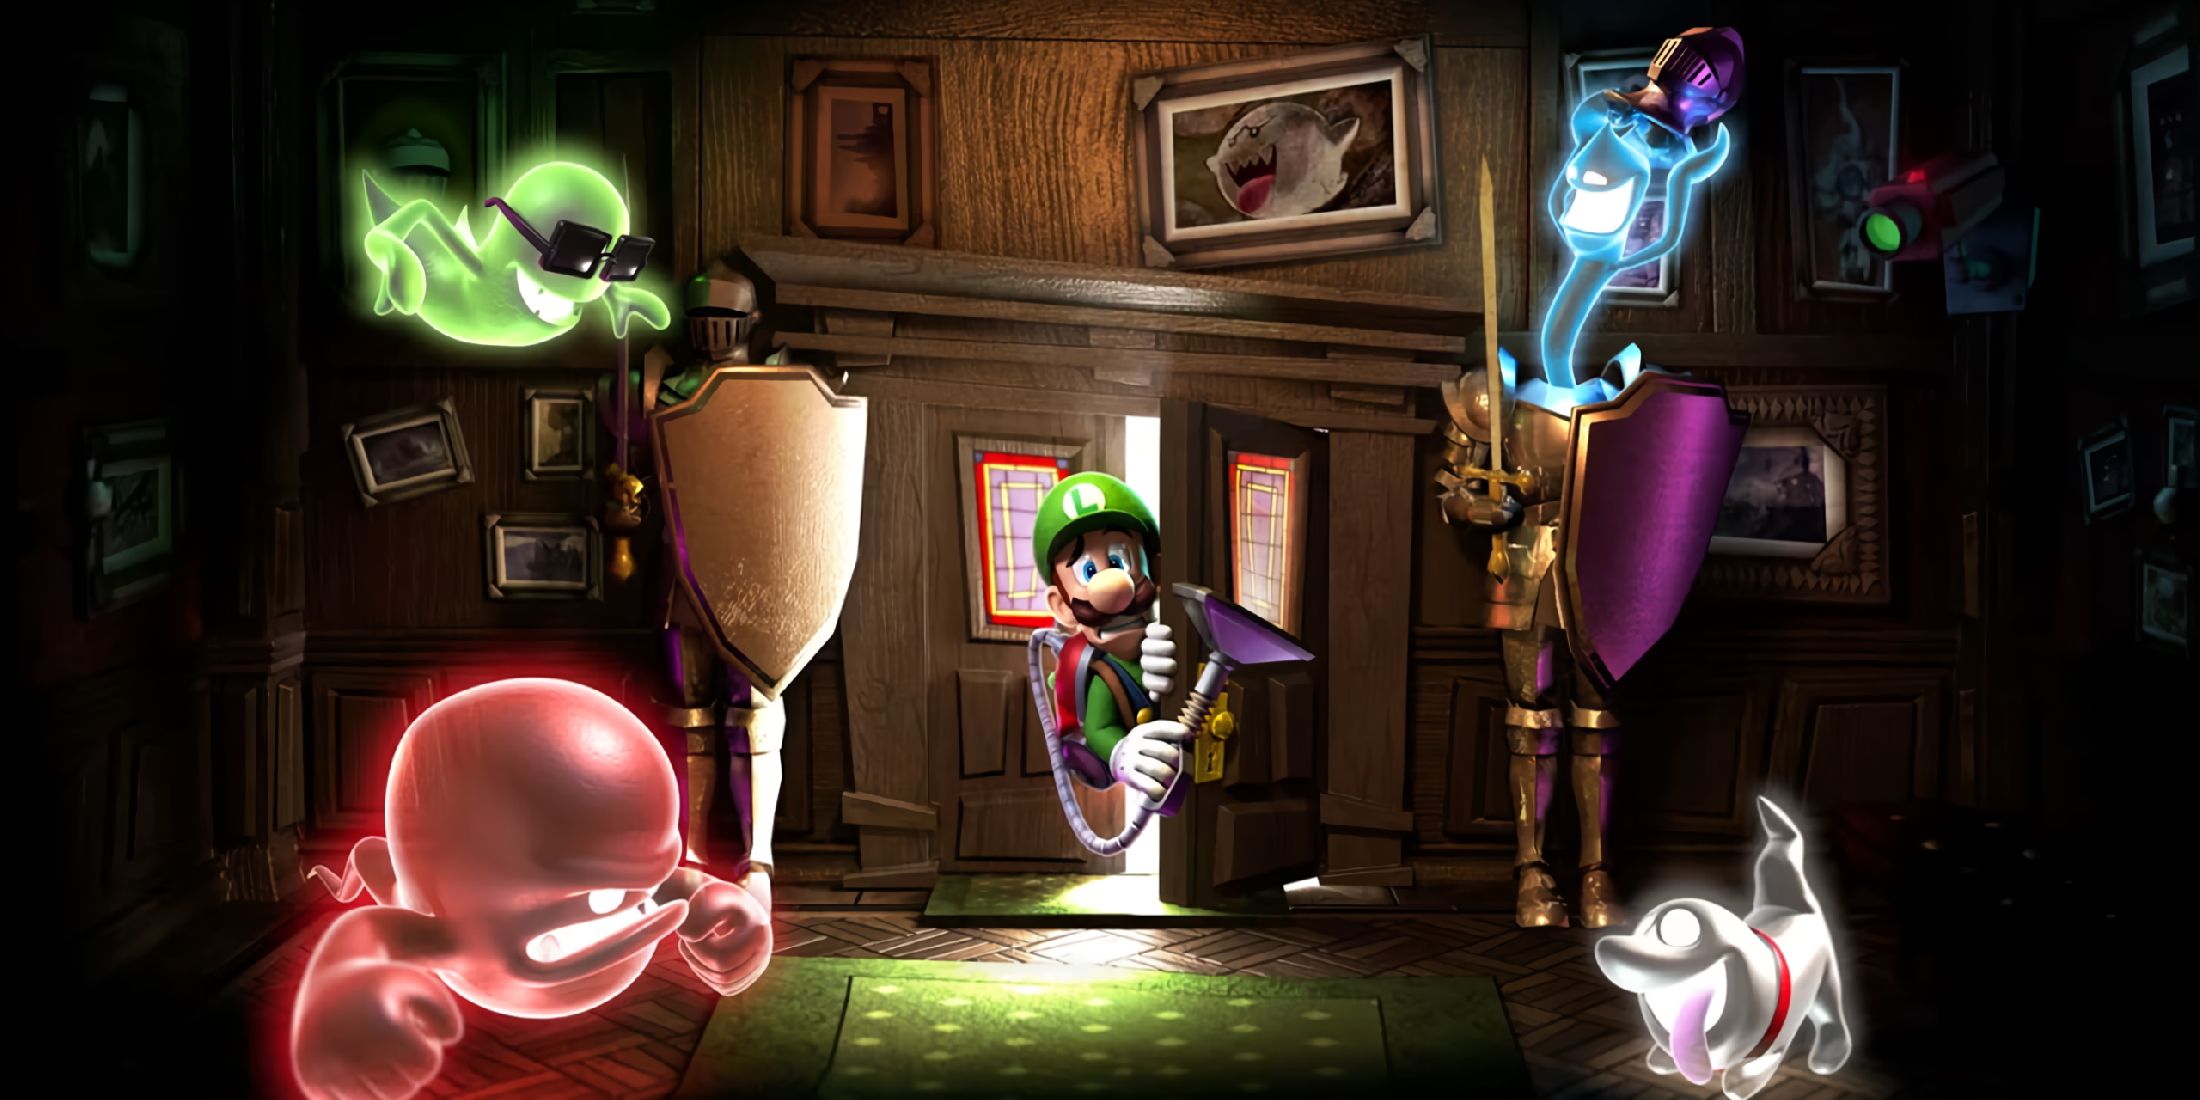 A promotional visual for Luigi's Mansion 2 HD